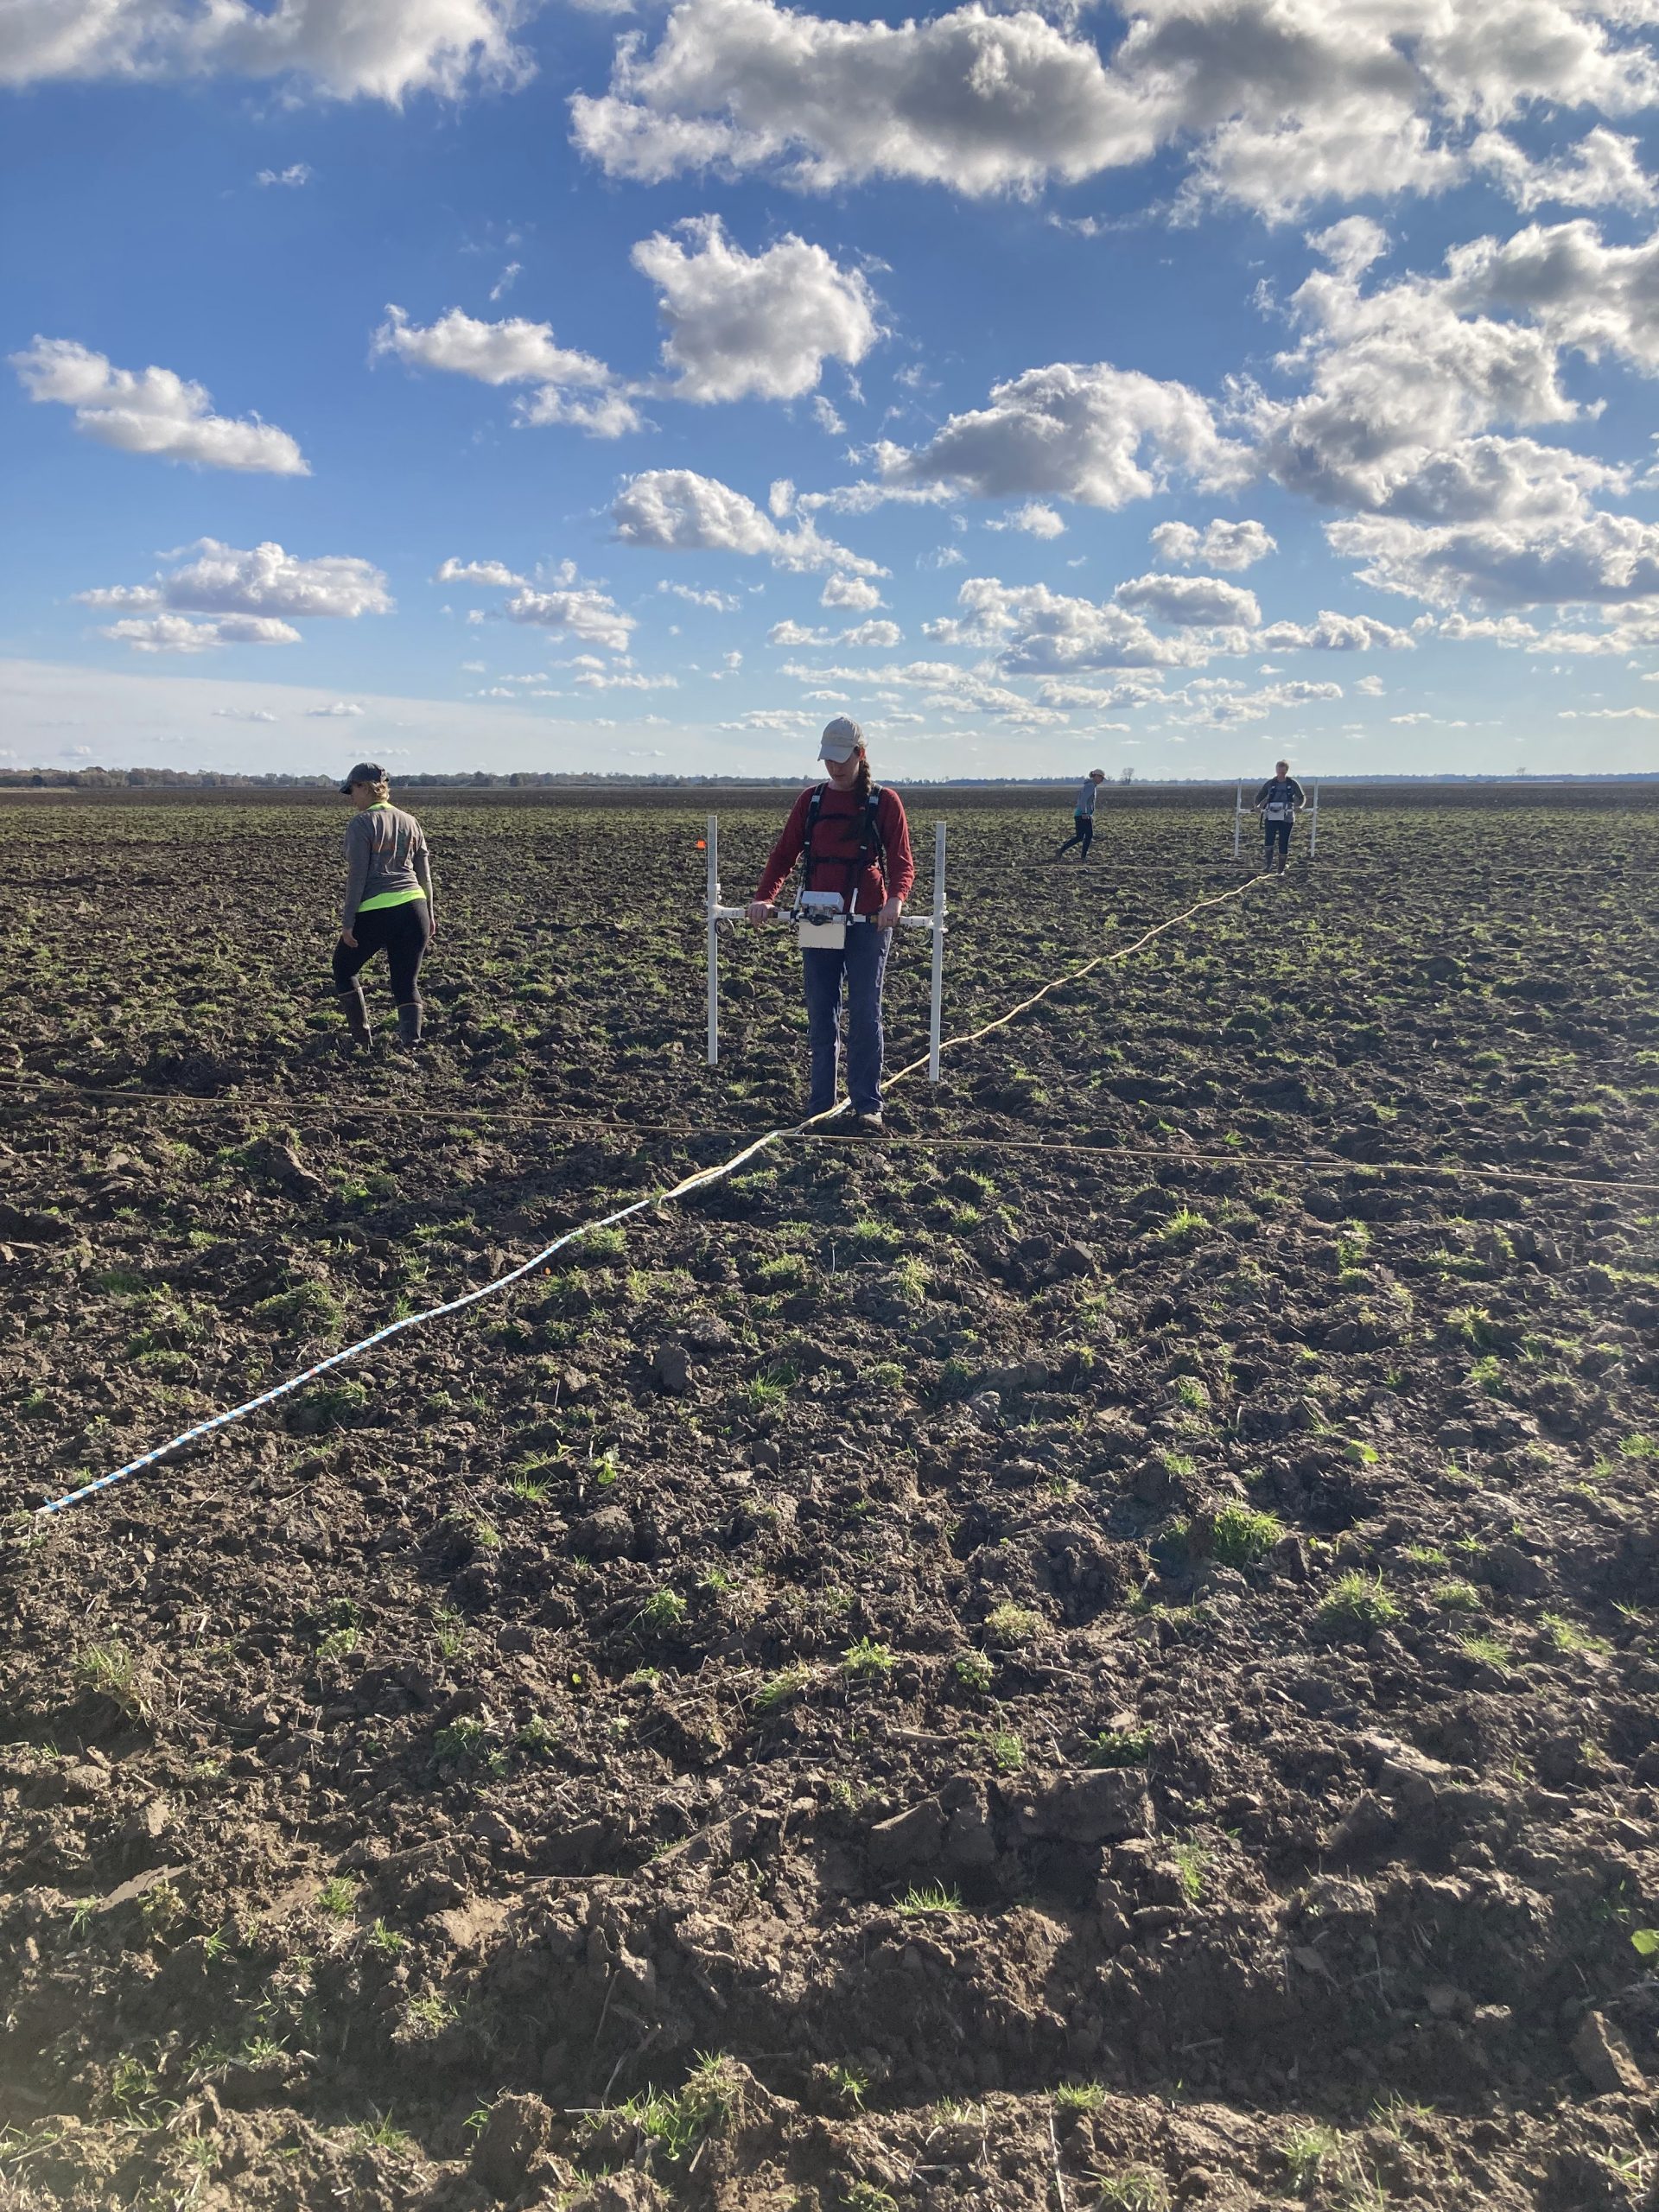 Photo of four people carrying equipment as they walk through a plowed field.